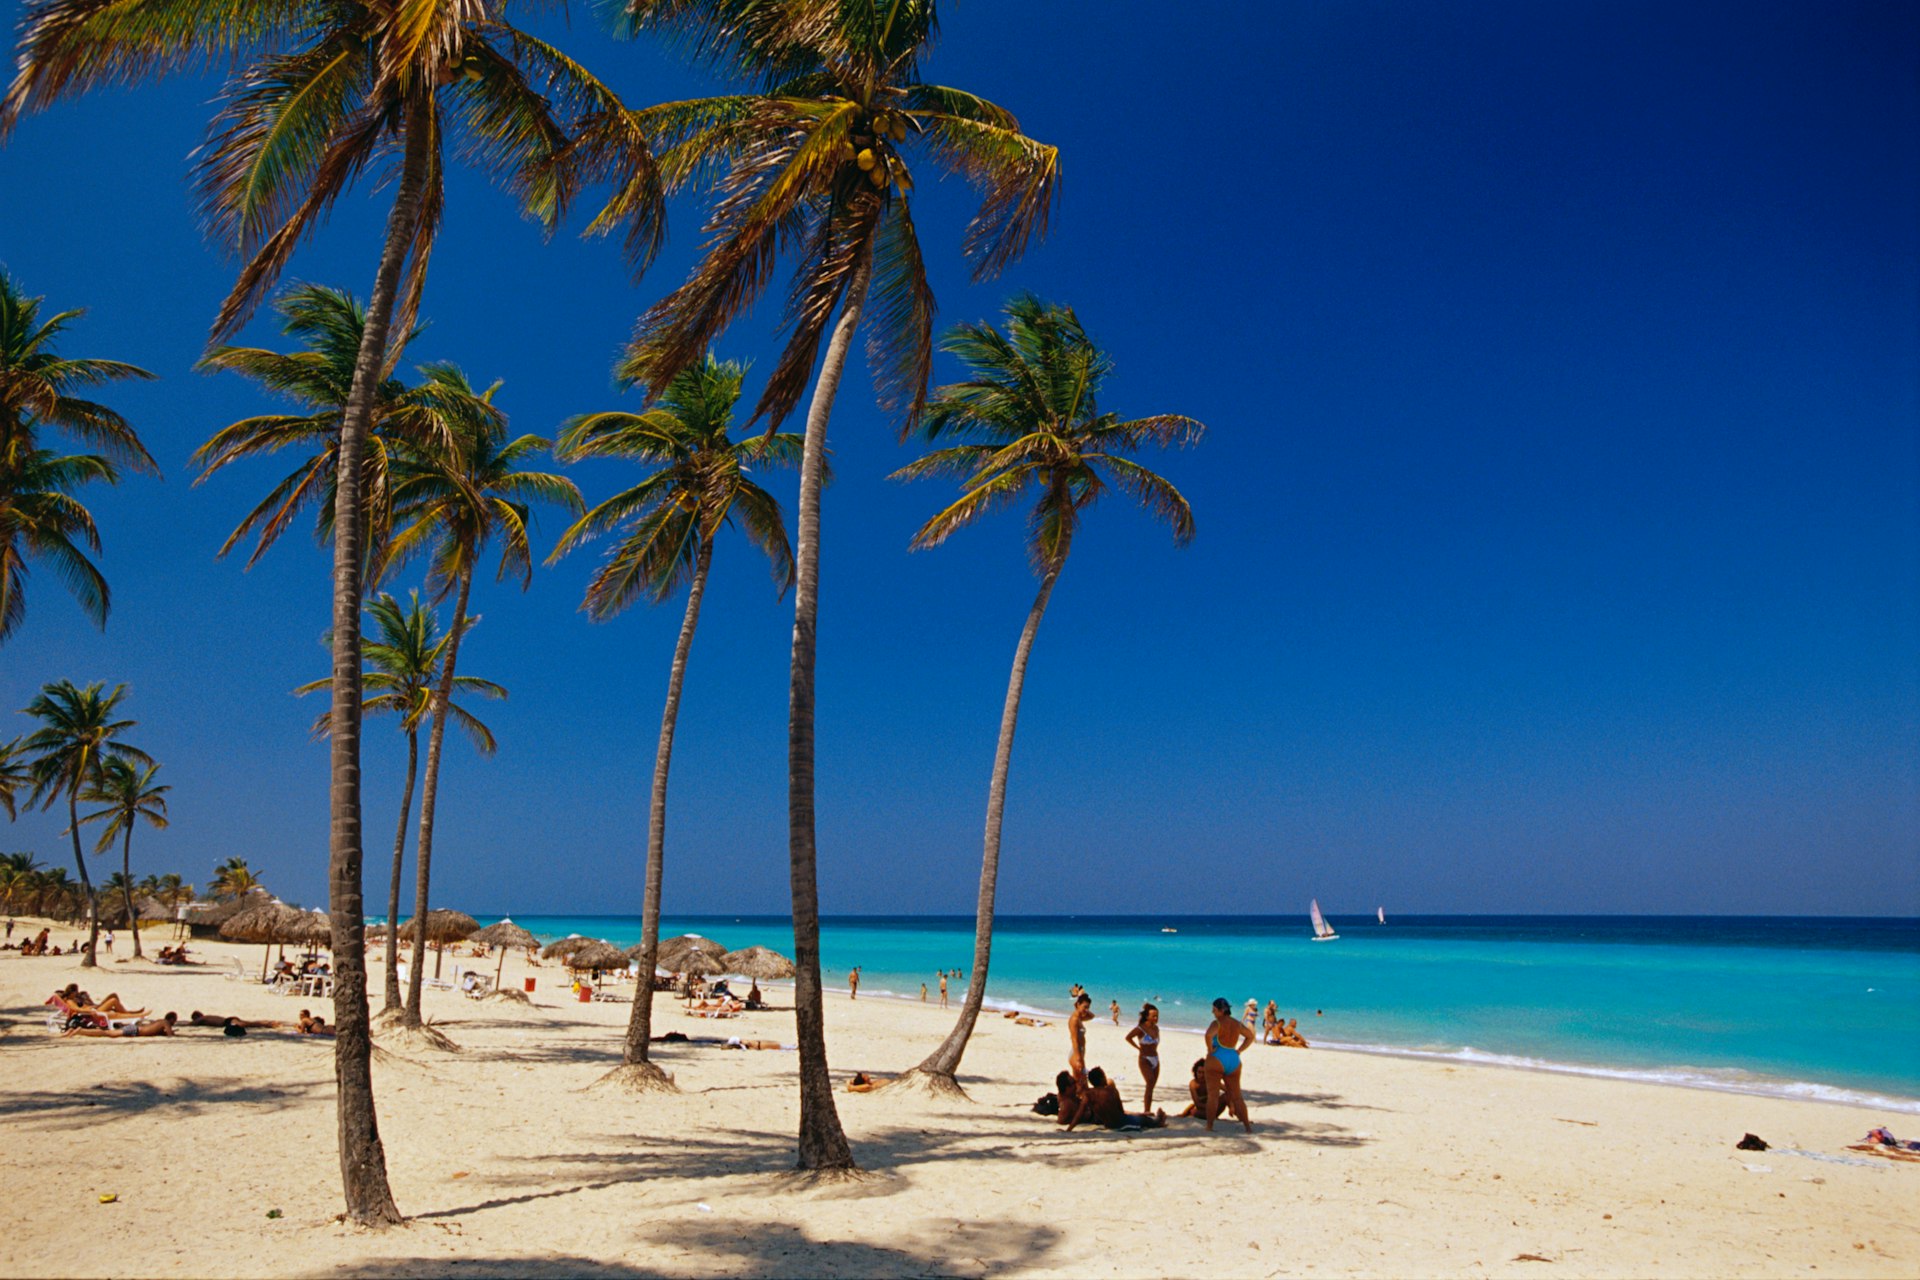 People lounge on the white sand of Santa María Beach in Cuba